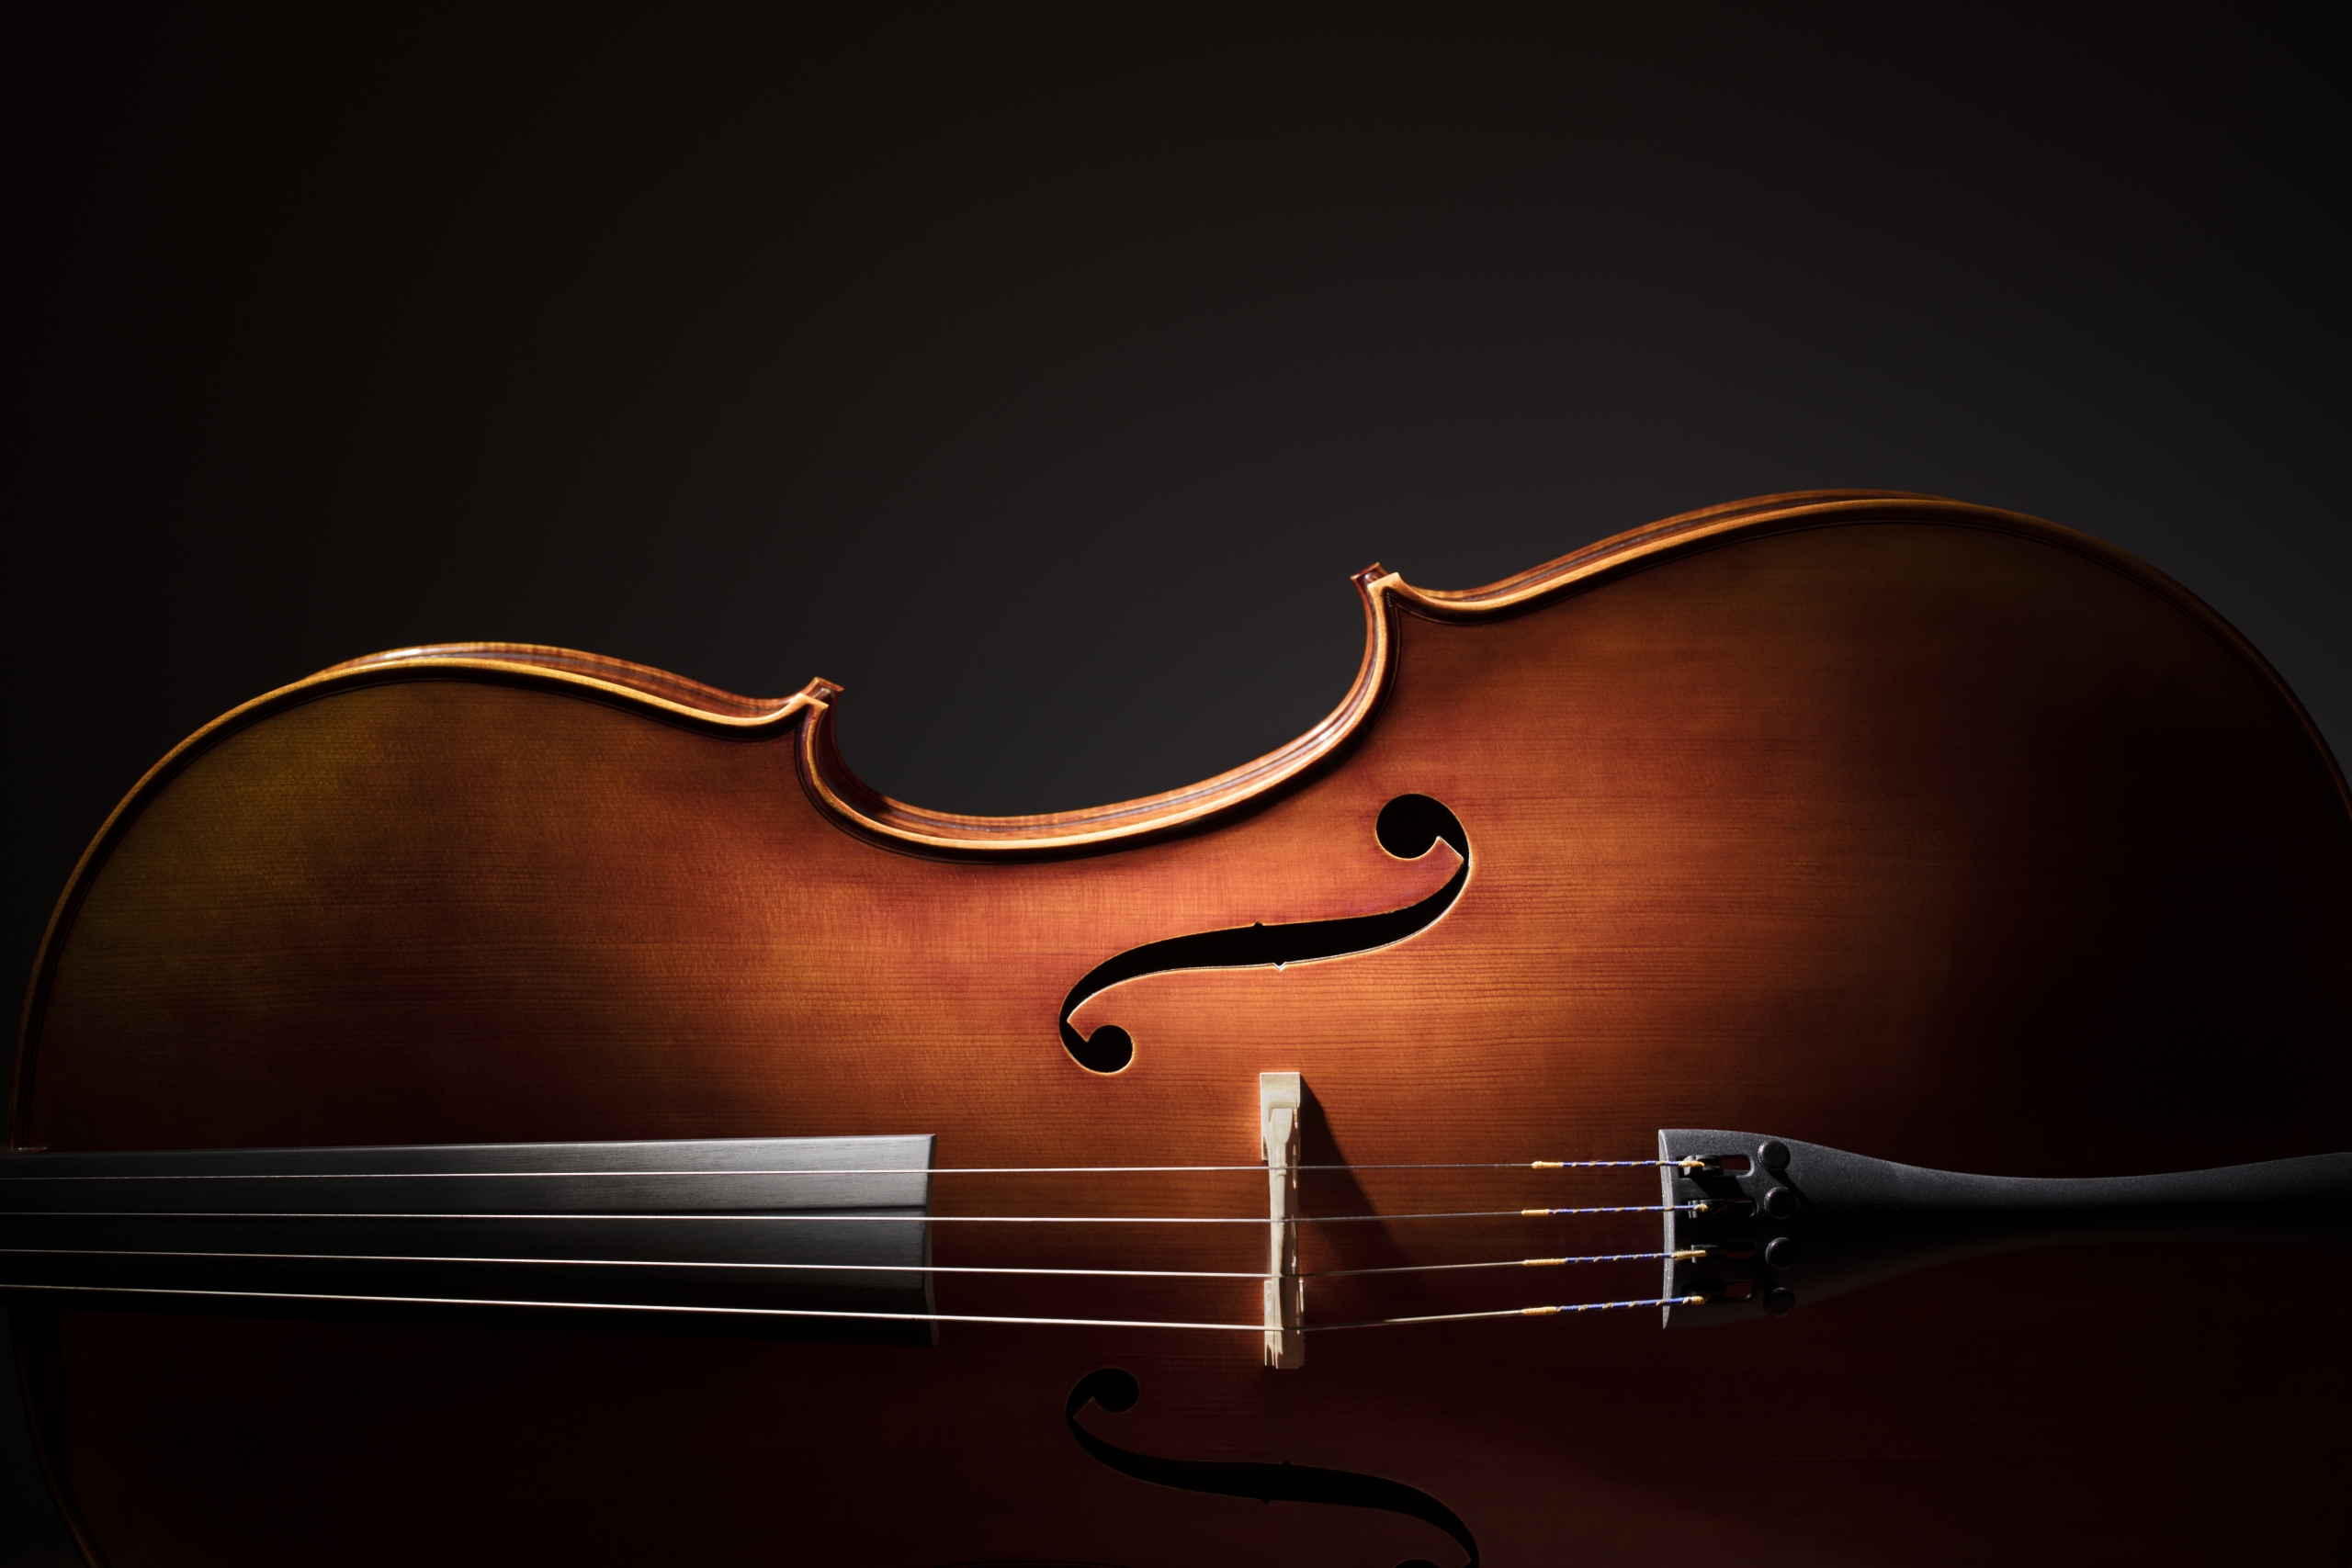 Silhouette of a violin on black background